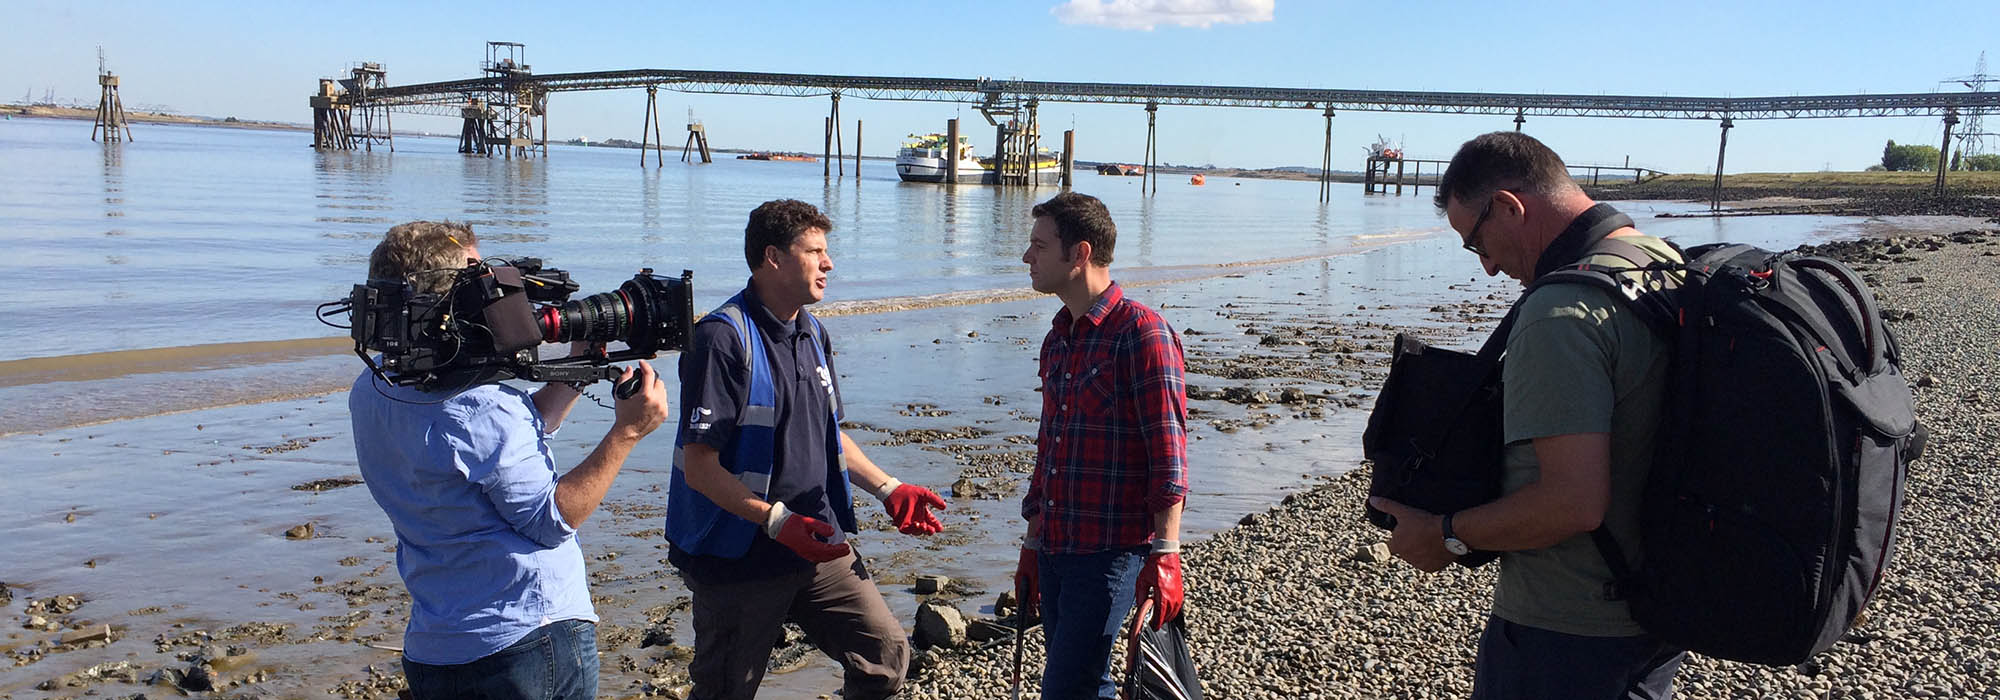 Volunteers needed to help ‘Deep Clean’ Thames foreshore on some of lowest tides of 2013